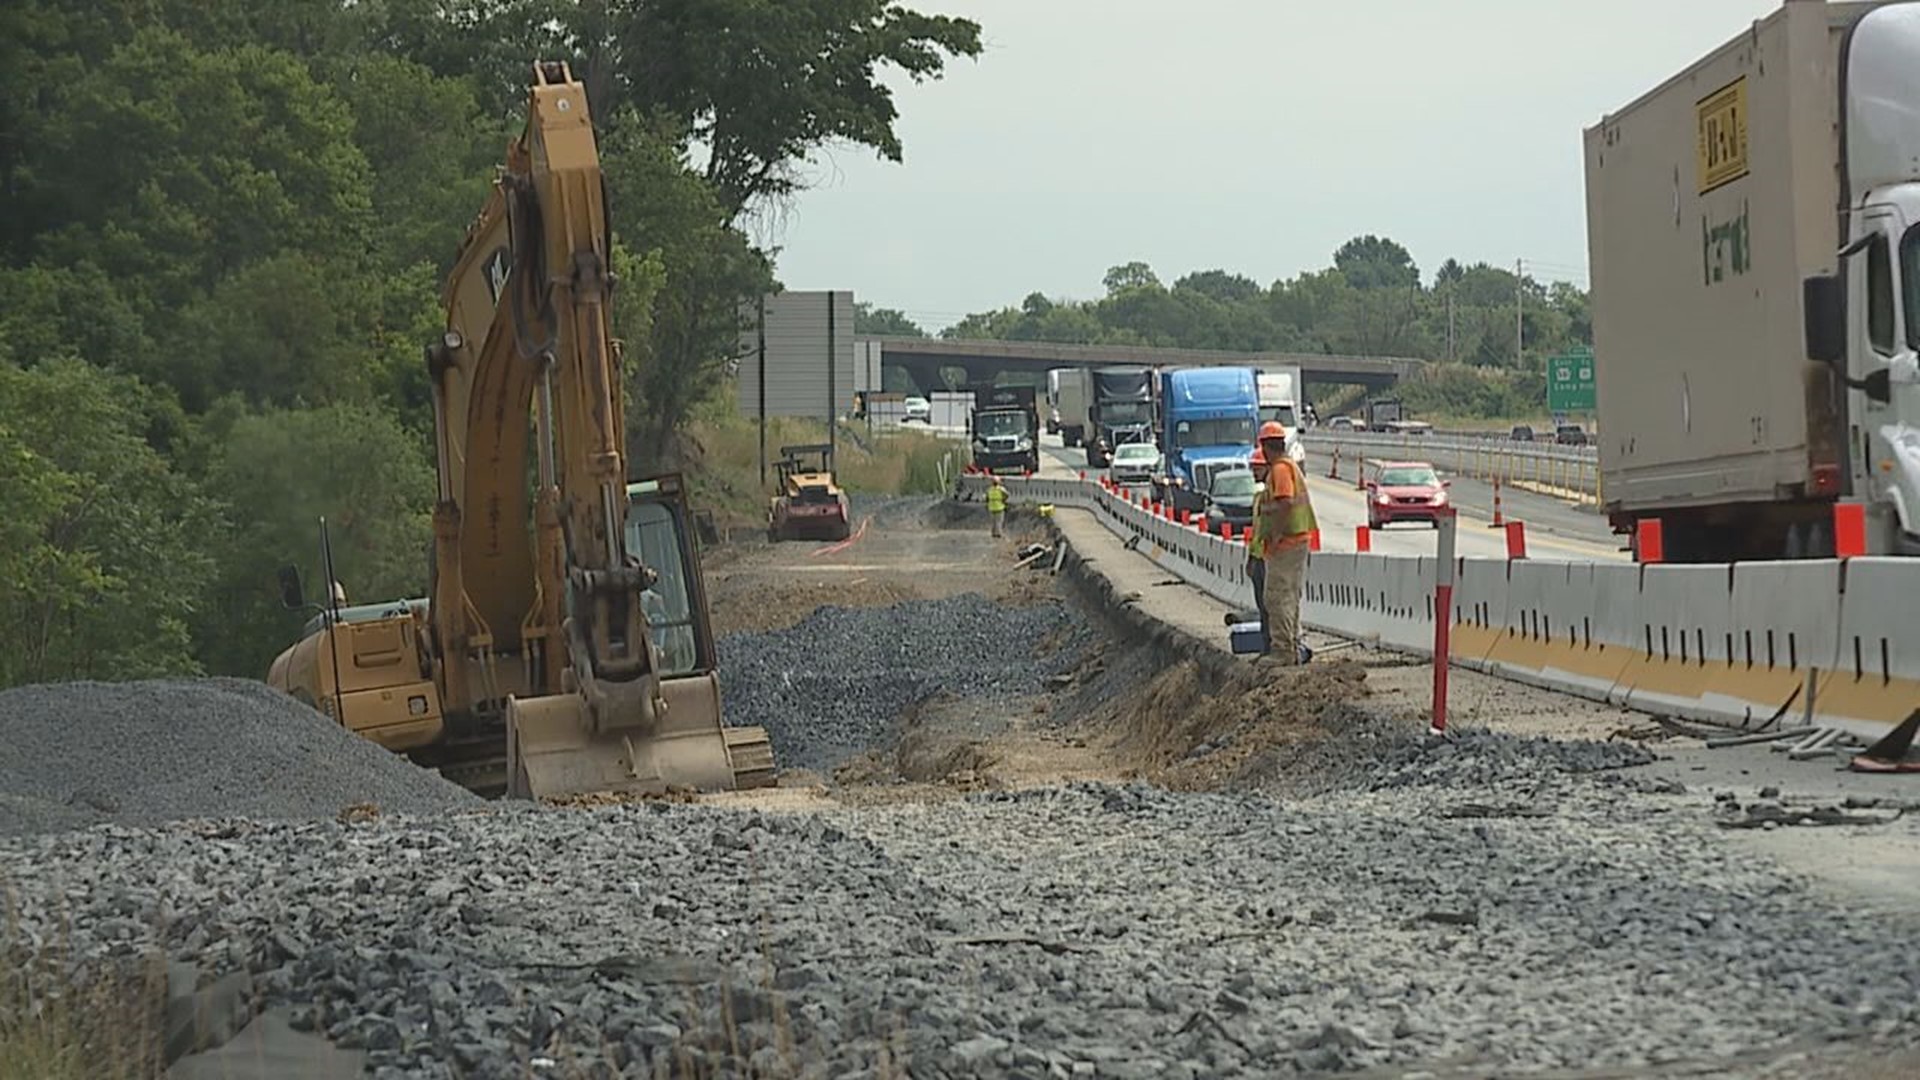 Three construction workers were killed in Fairview Township, York County, as officials continue to urge safe driving practices.